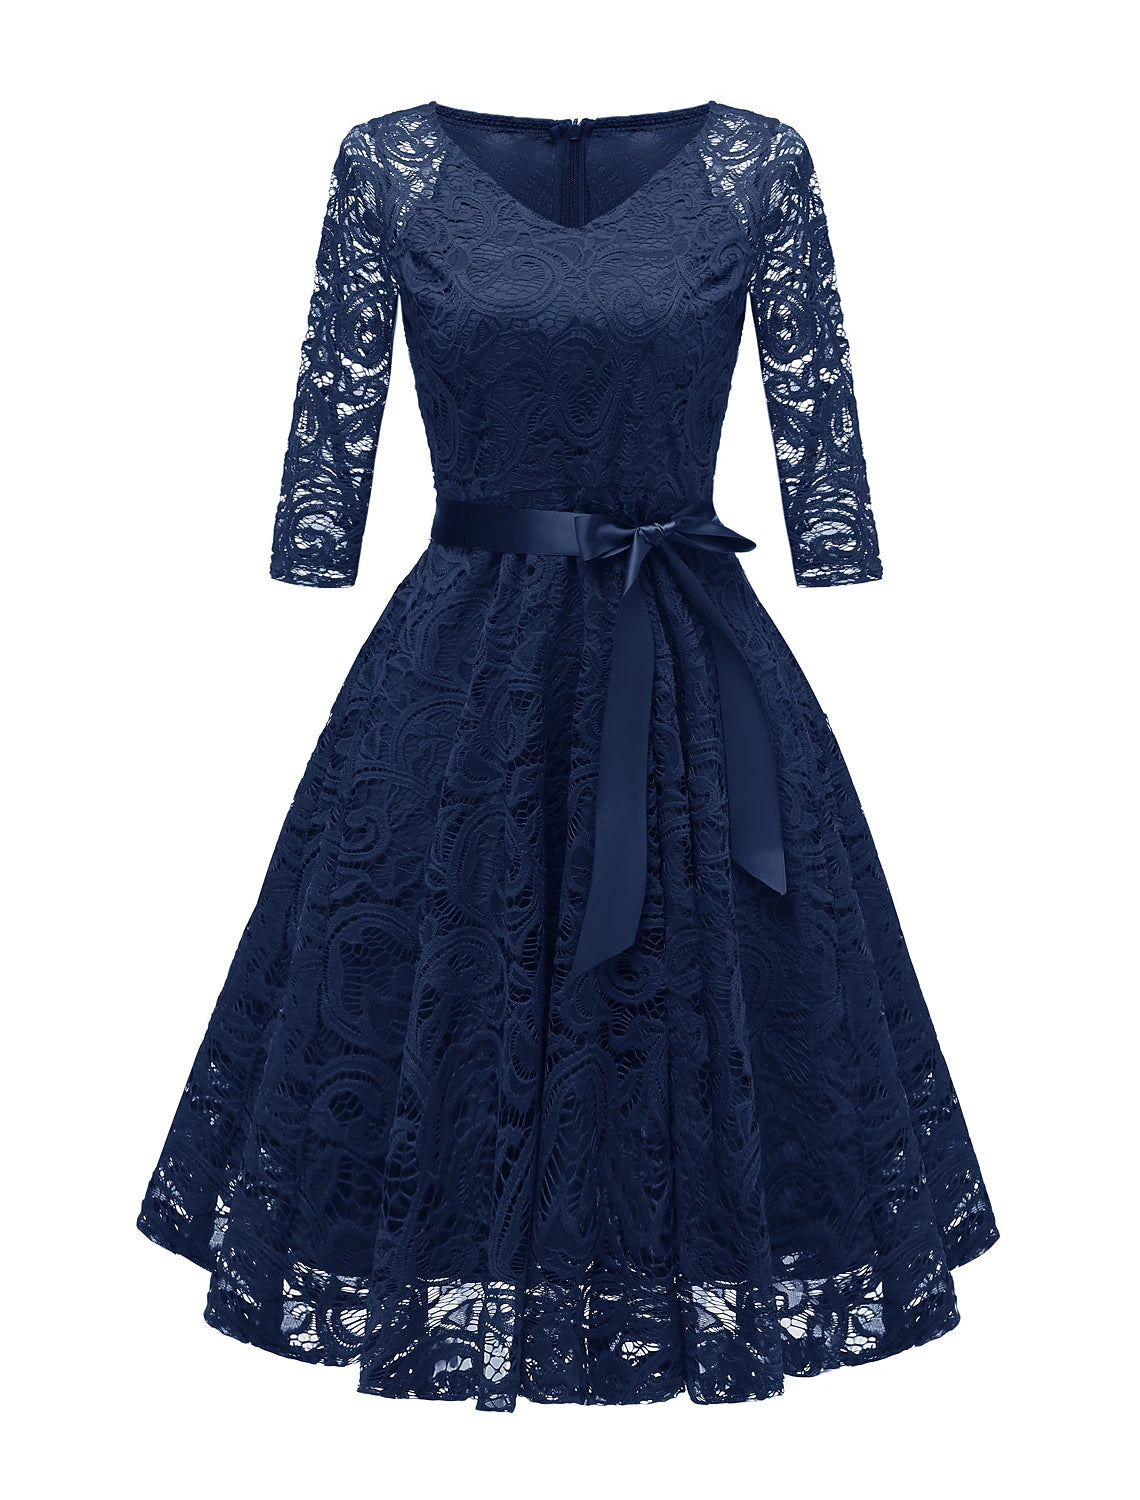 A-Line Cocktail Dresses Minimalist Dress Party Wear Short / Mini 3/4 Length Sleeve V Neck Lace with Bow(s) Pleats